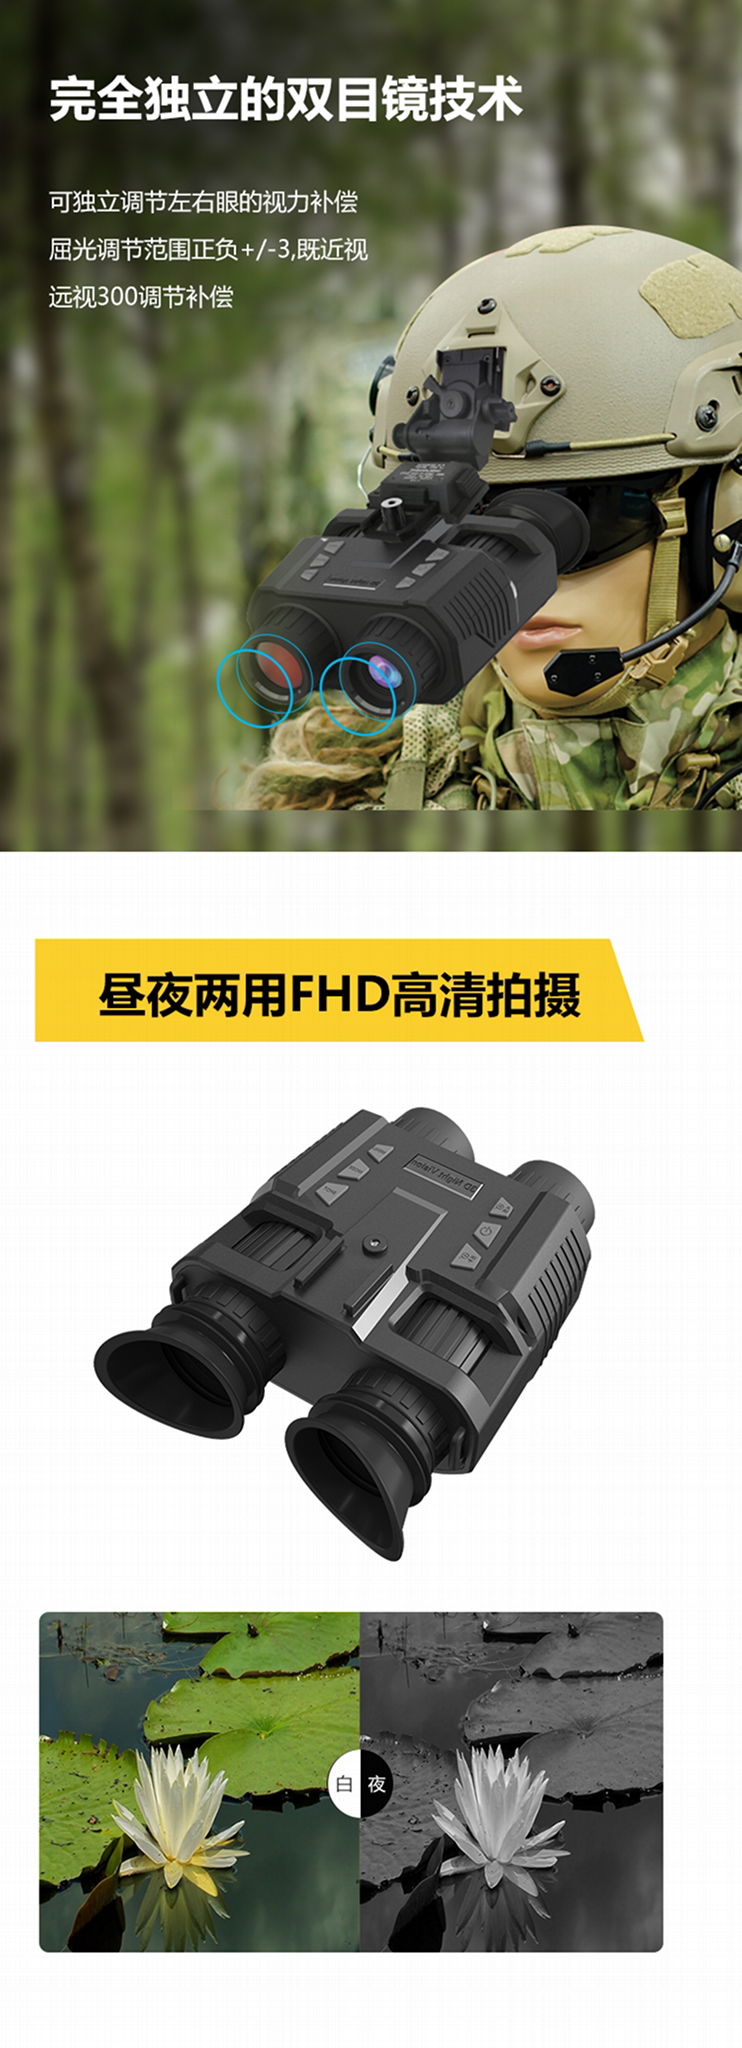 Dual-screen binocular infrared night vision device with helmet mount 2